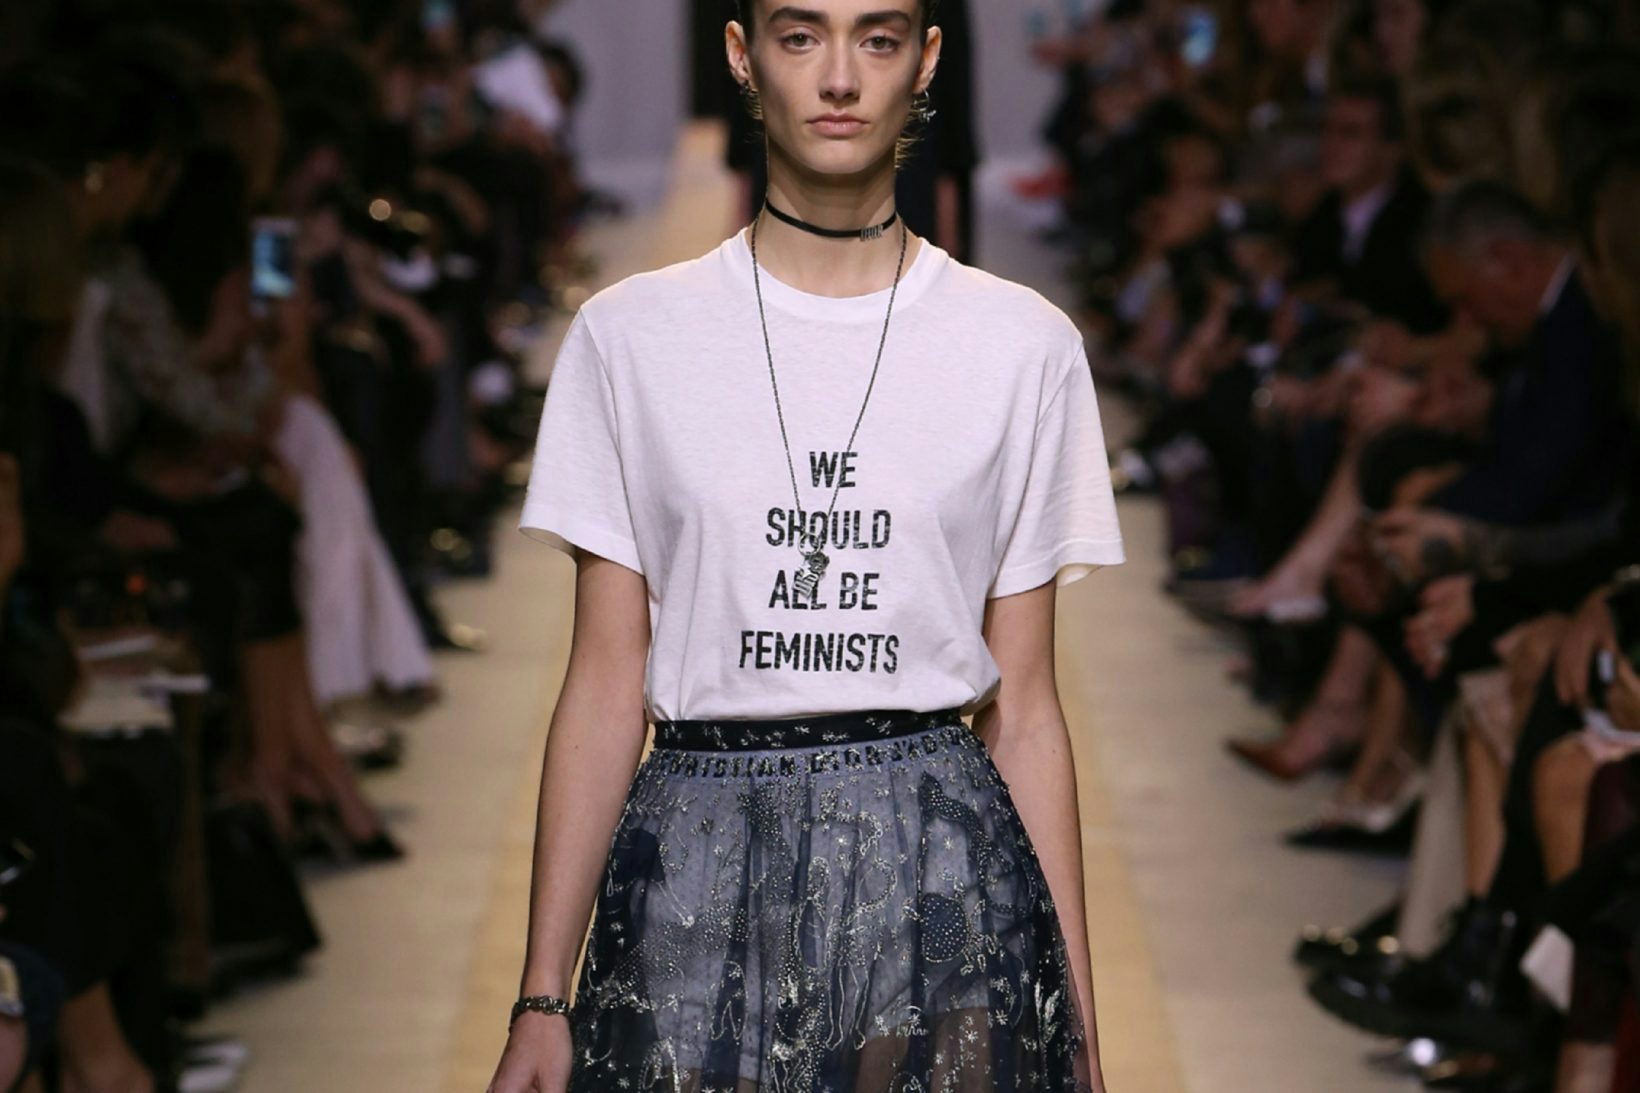 The story of women’s rights through the eyes of fashion